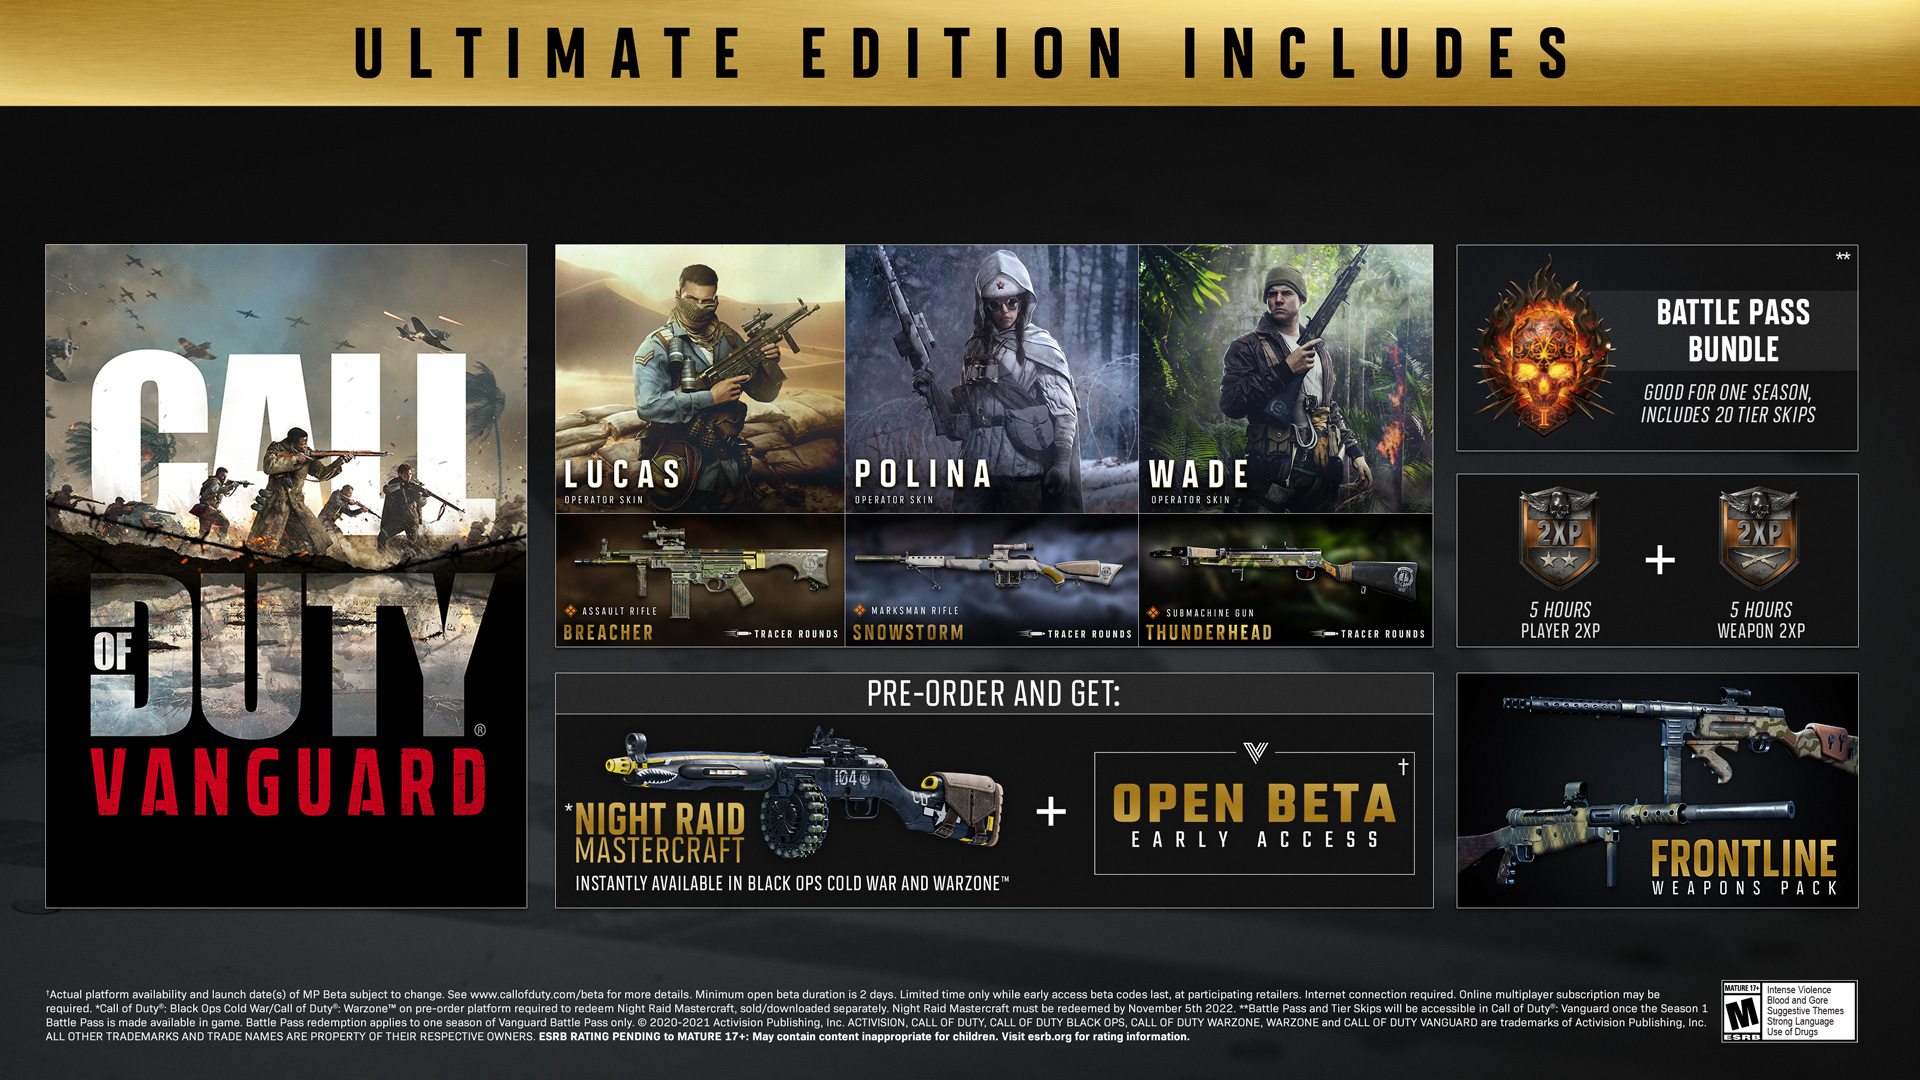 Call of Duty Vanguard release date & time, Cheapest price, best deal